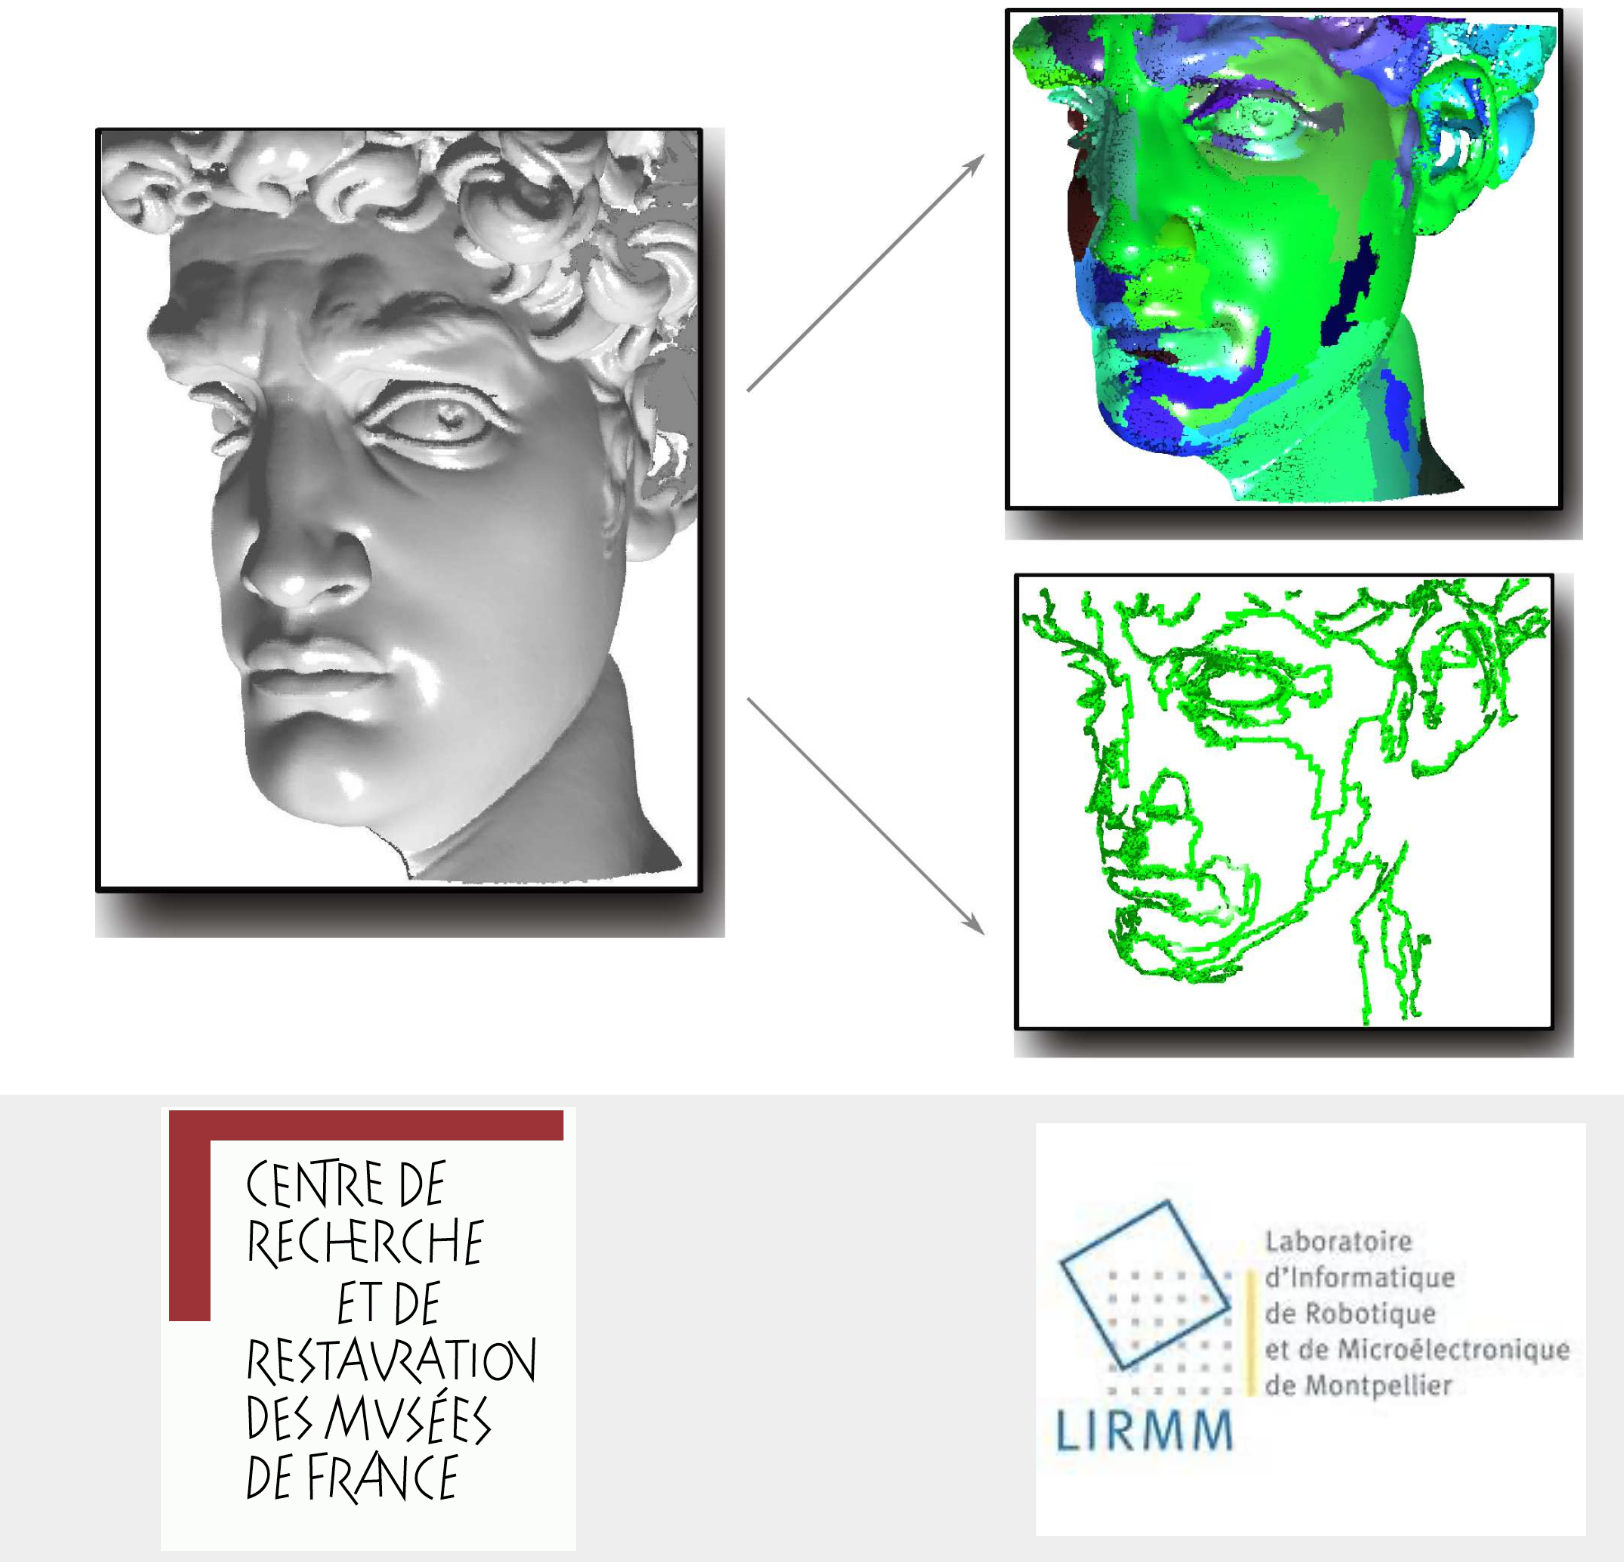 Segmentaion and region-based registration applied to 3D raw point clouds  - Application to Cultural Heritage (Doutorado)